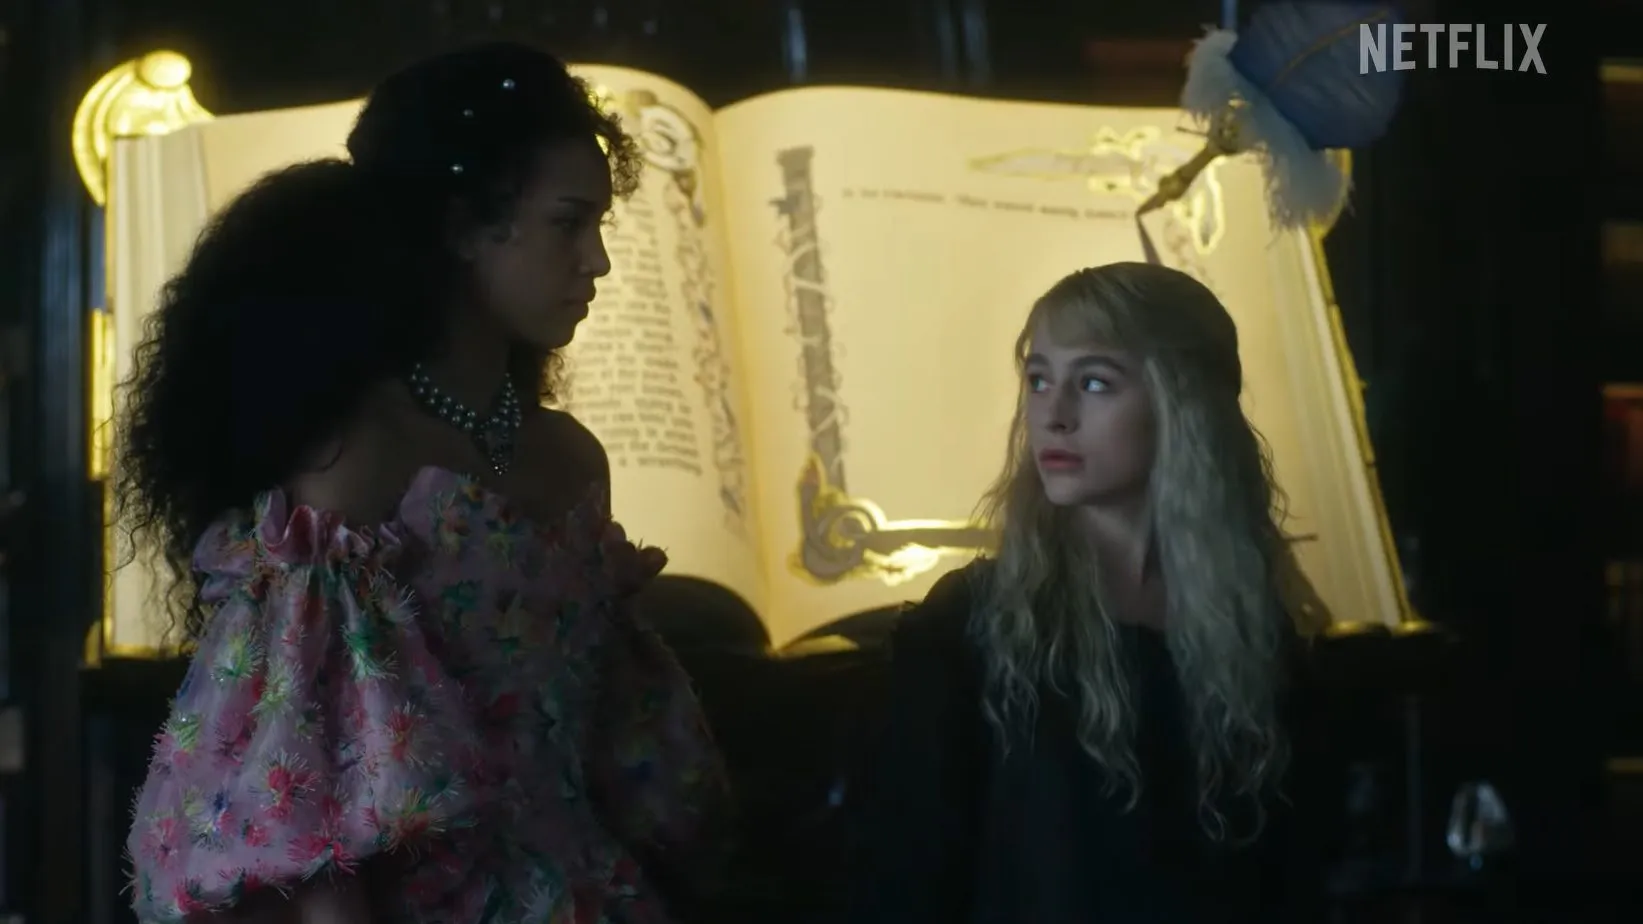 The School for Good and Evil Trailer Previews Netflix's Fantasy Film